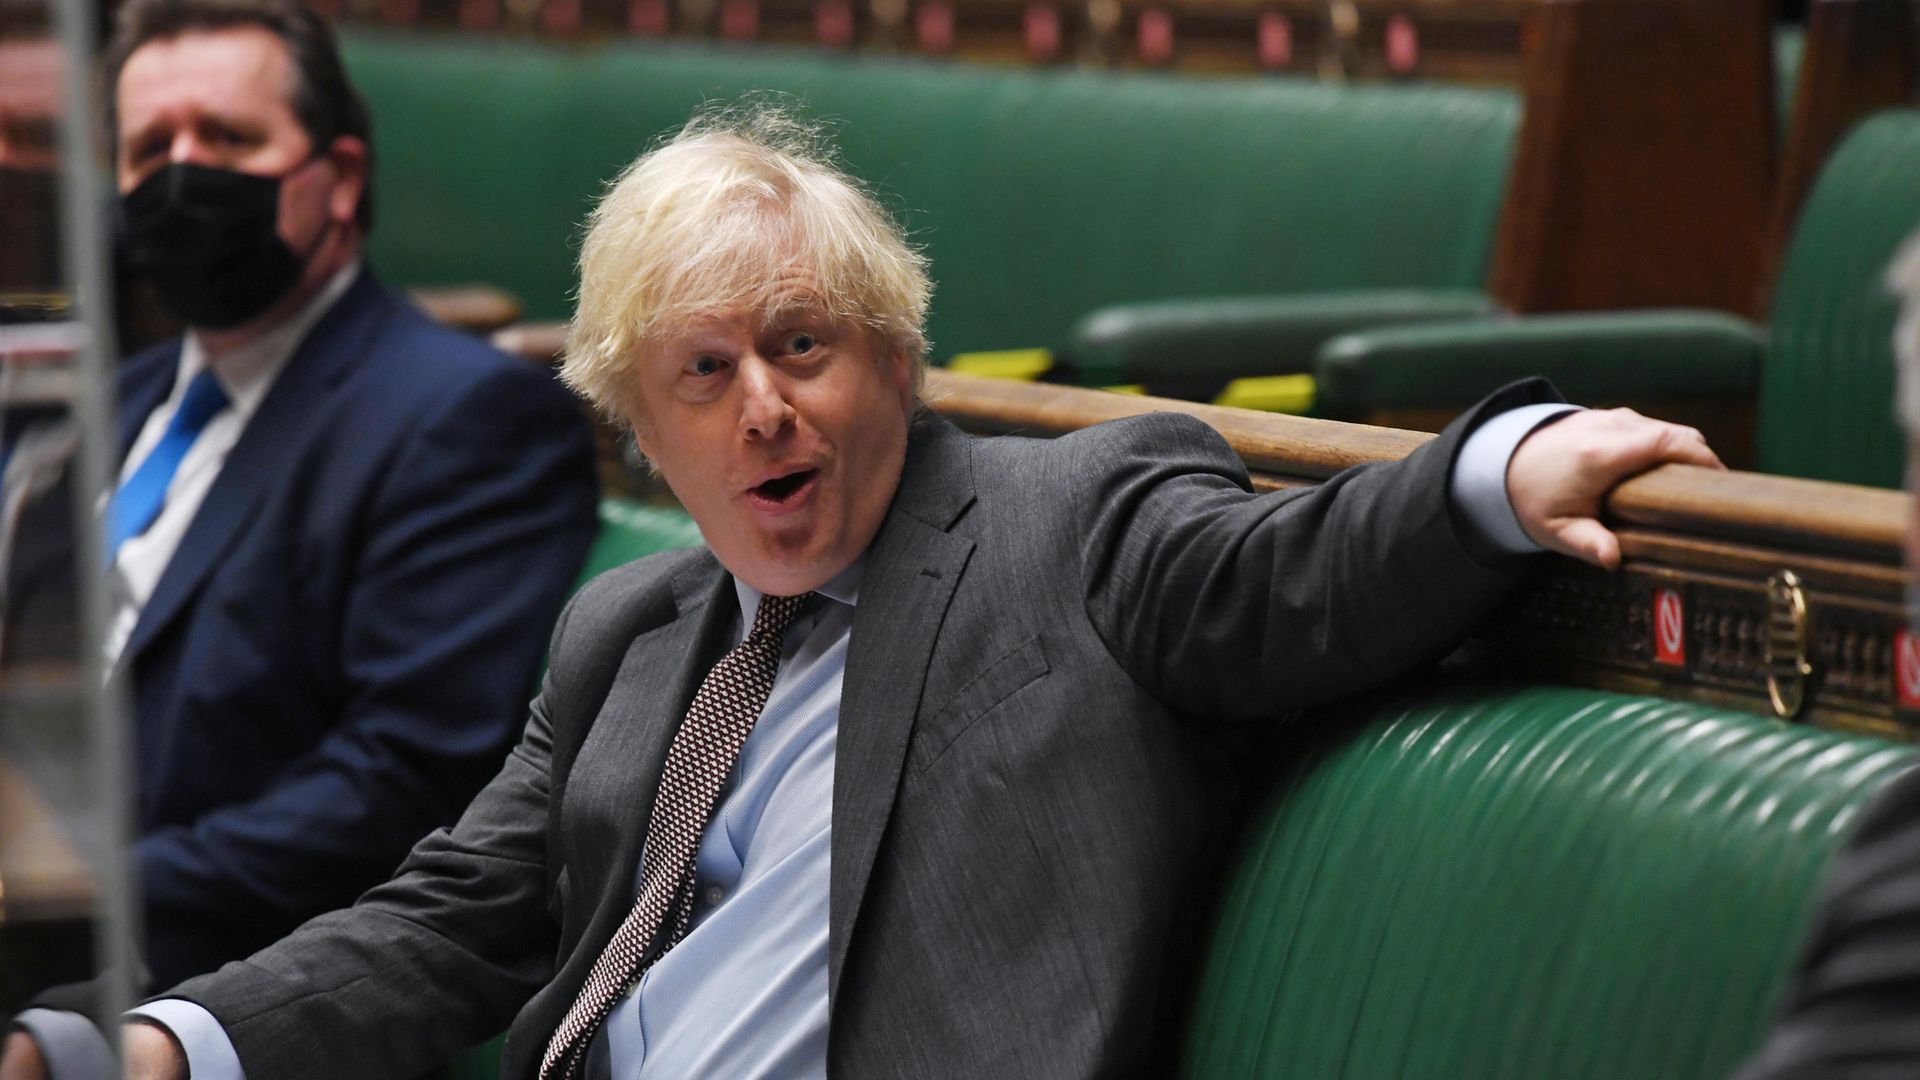 Prime Minister Boris Johnson during Prime Minister's Questions - Credit: PA